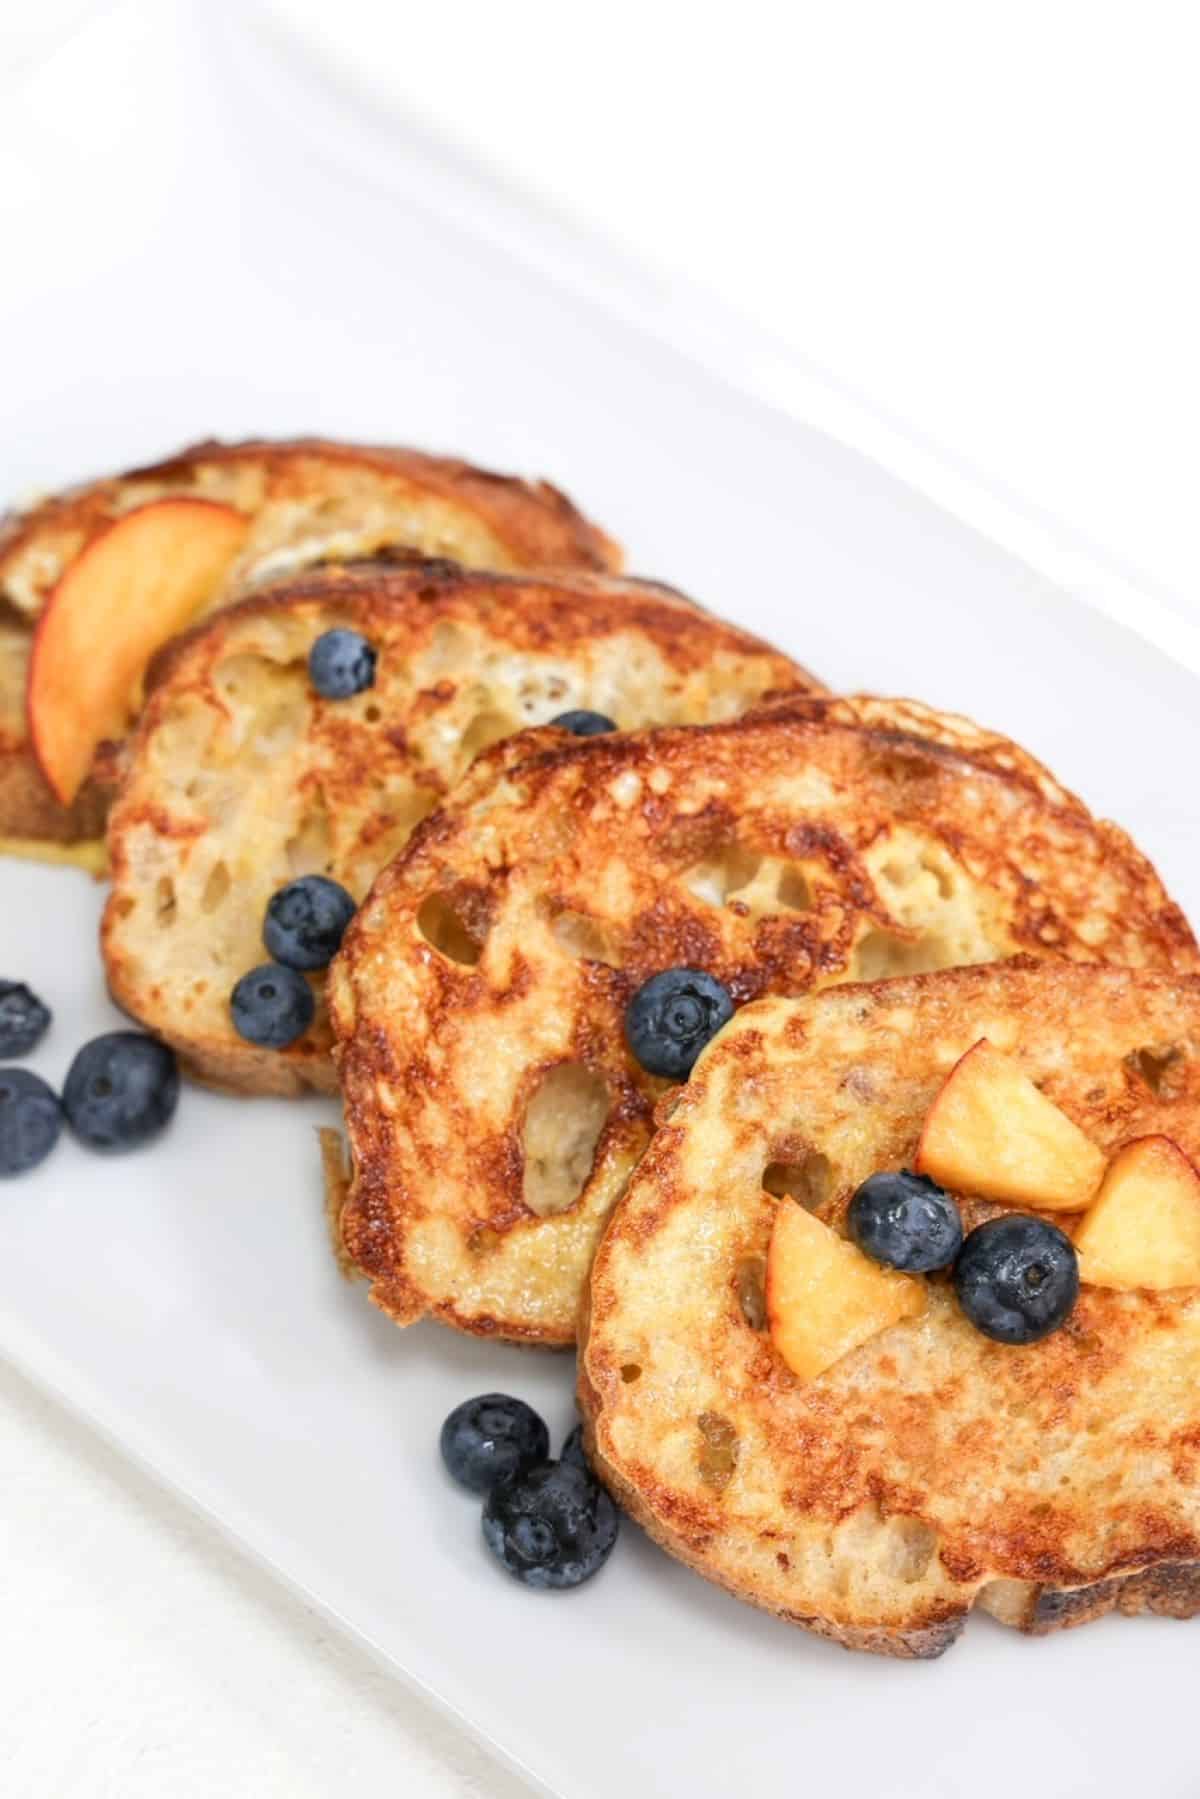 Four slices of sourdough French toast overlapping, topped with blueberries and peach slices.